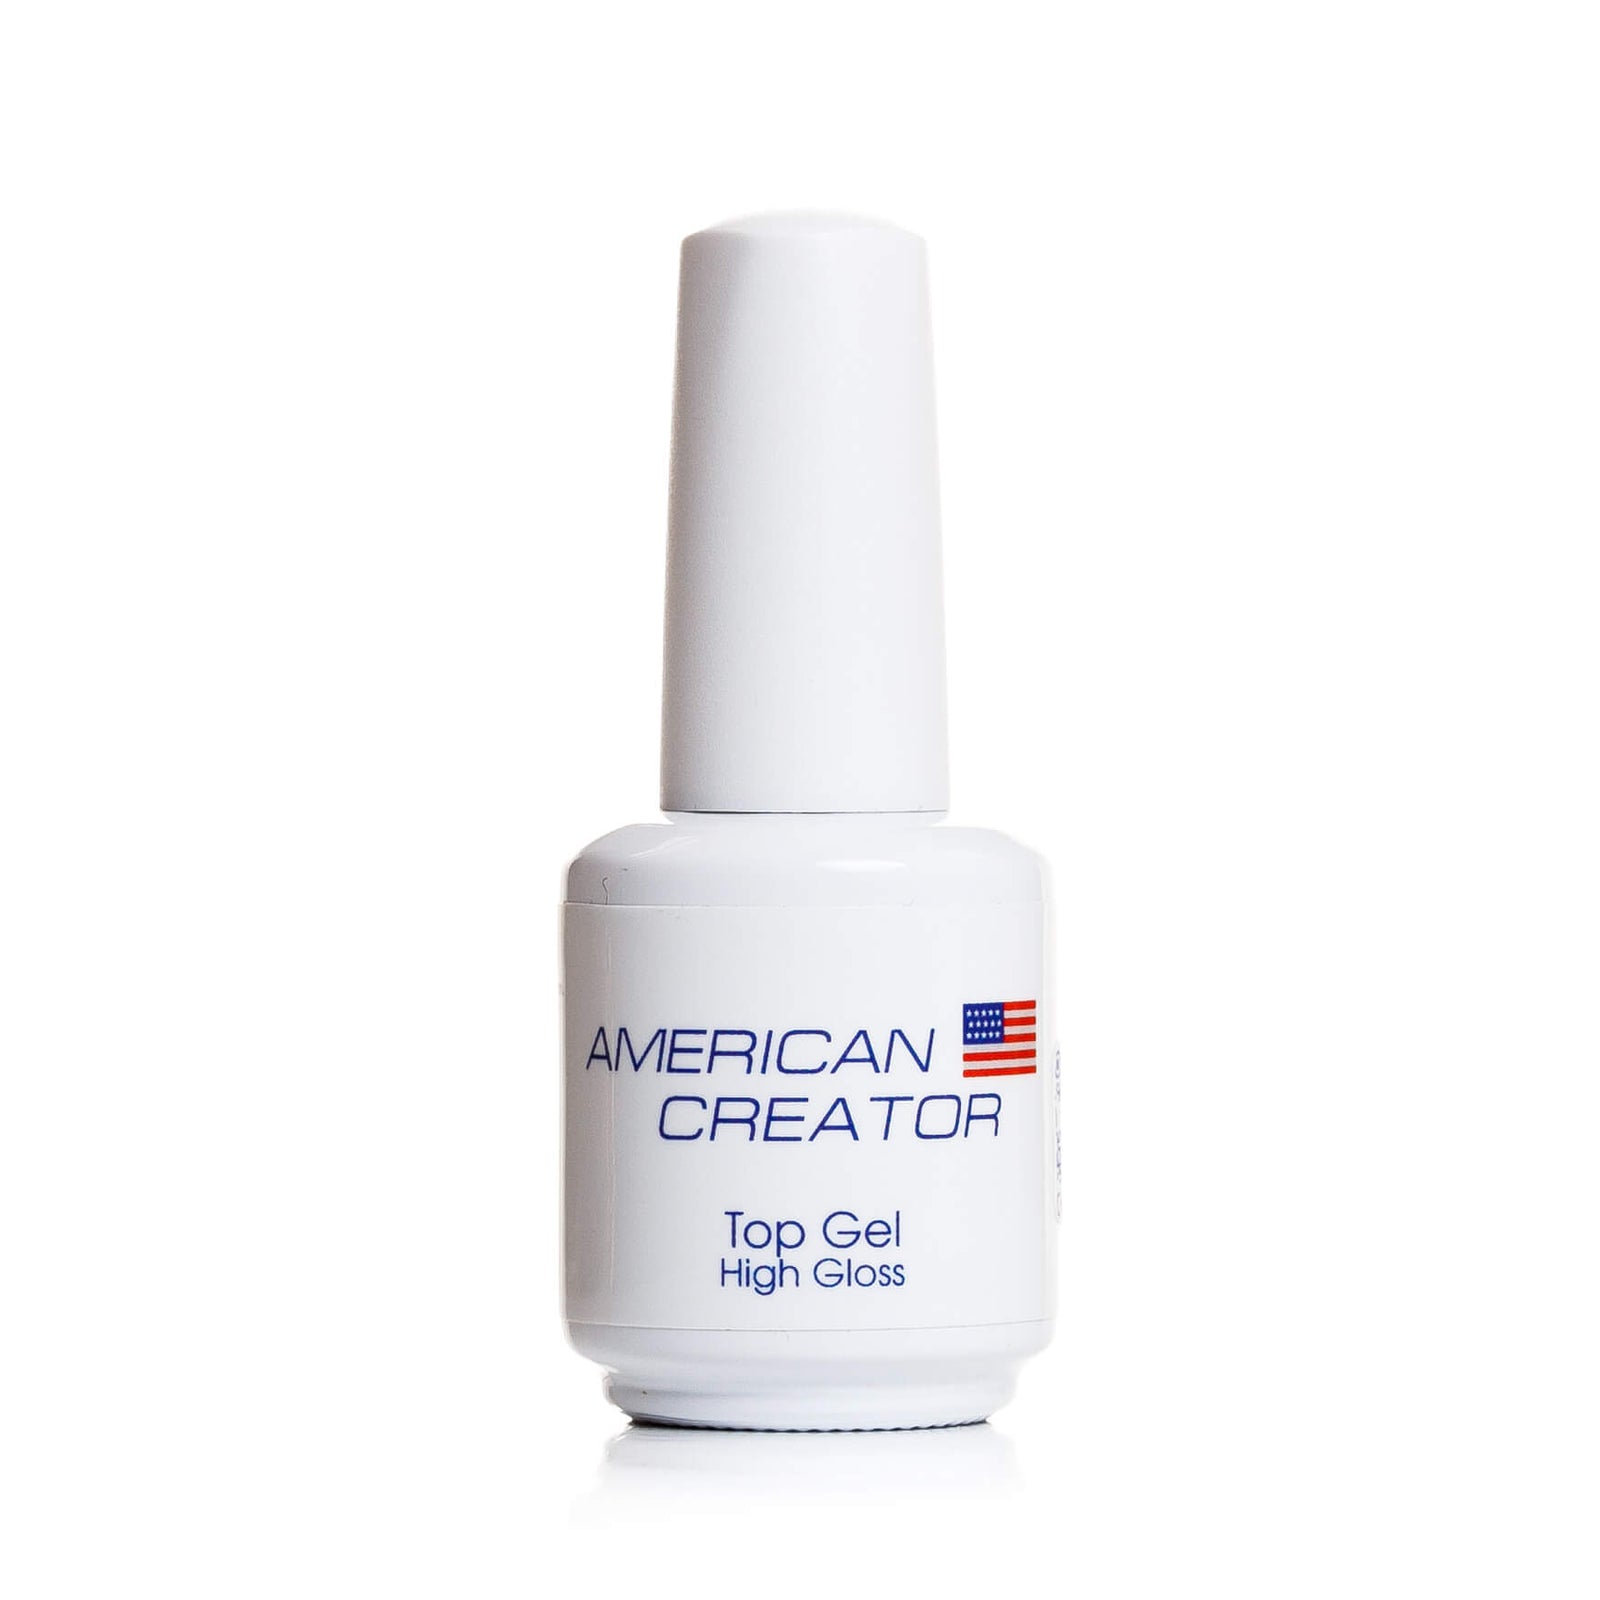 Exclusive  Offer: 23% Off TopCoat® F11® - Top Coat Products